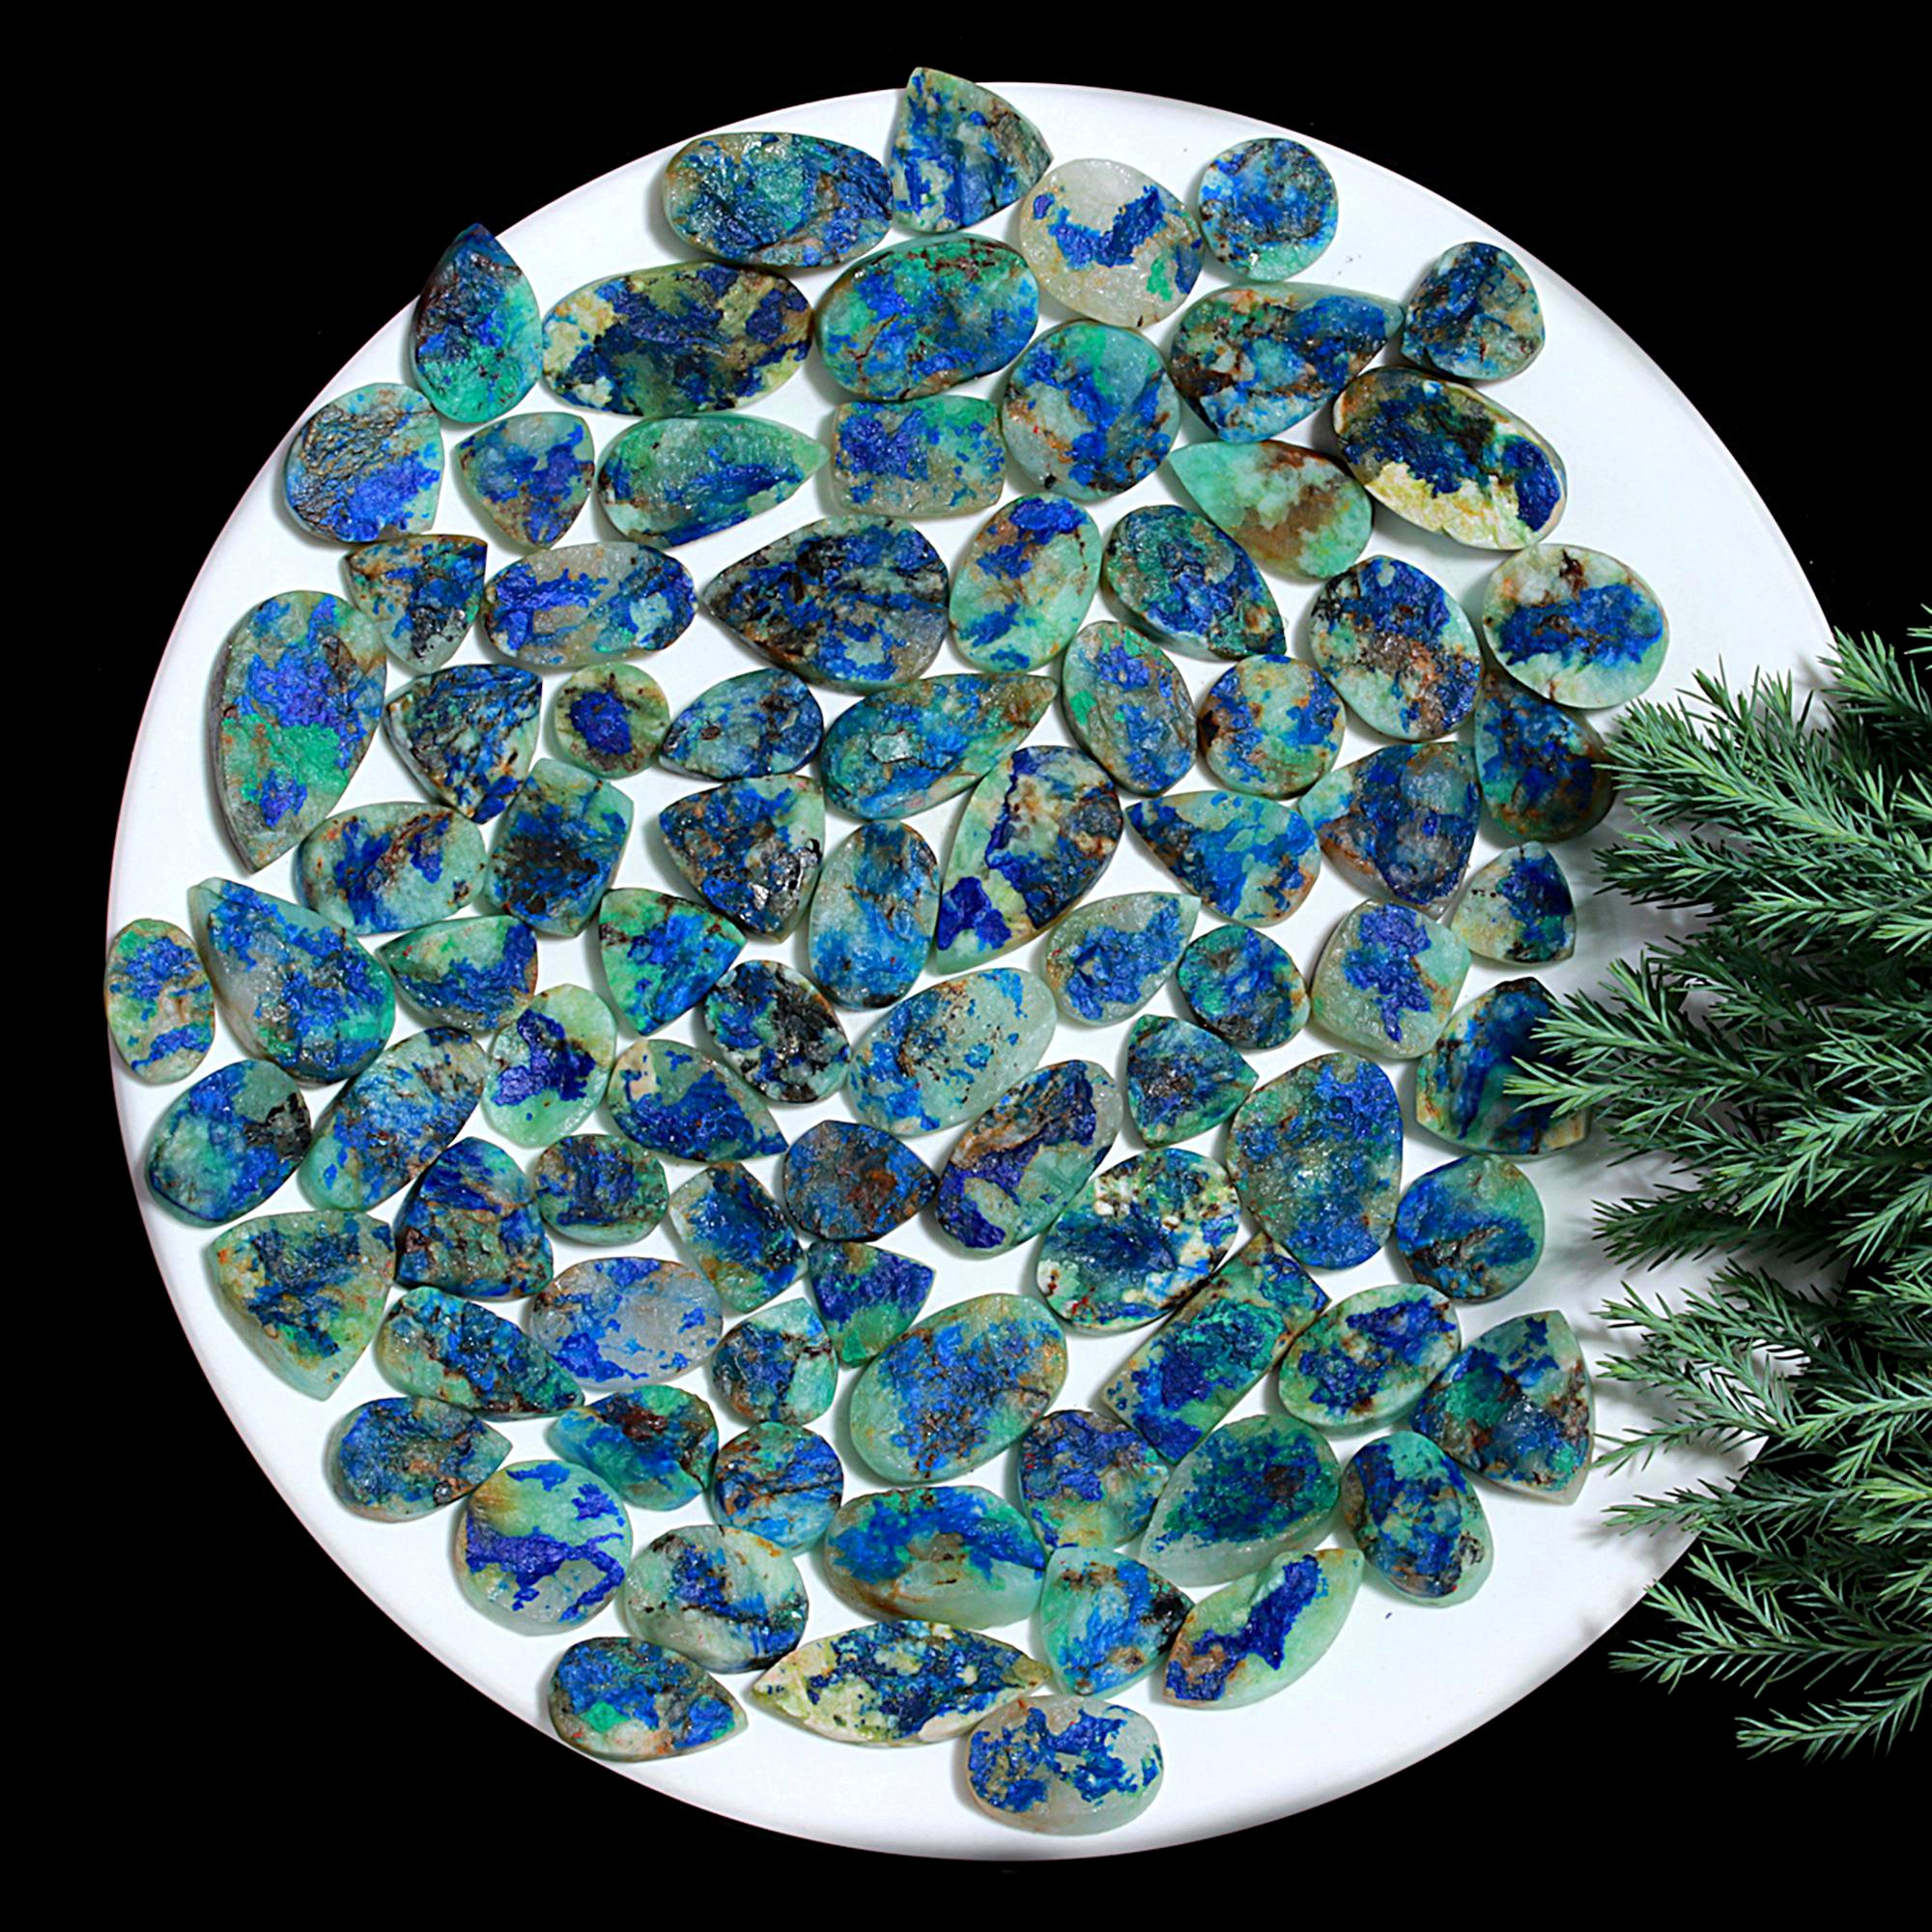 85 Pcs 1200.Cts Natural Azurite Druzy Unpolished Loose Cabochon Gemstone For Jewelry Wholesale Lot Size 30x12 14x13mm